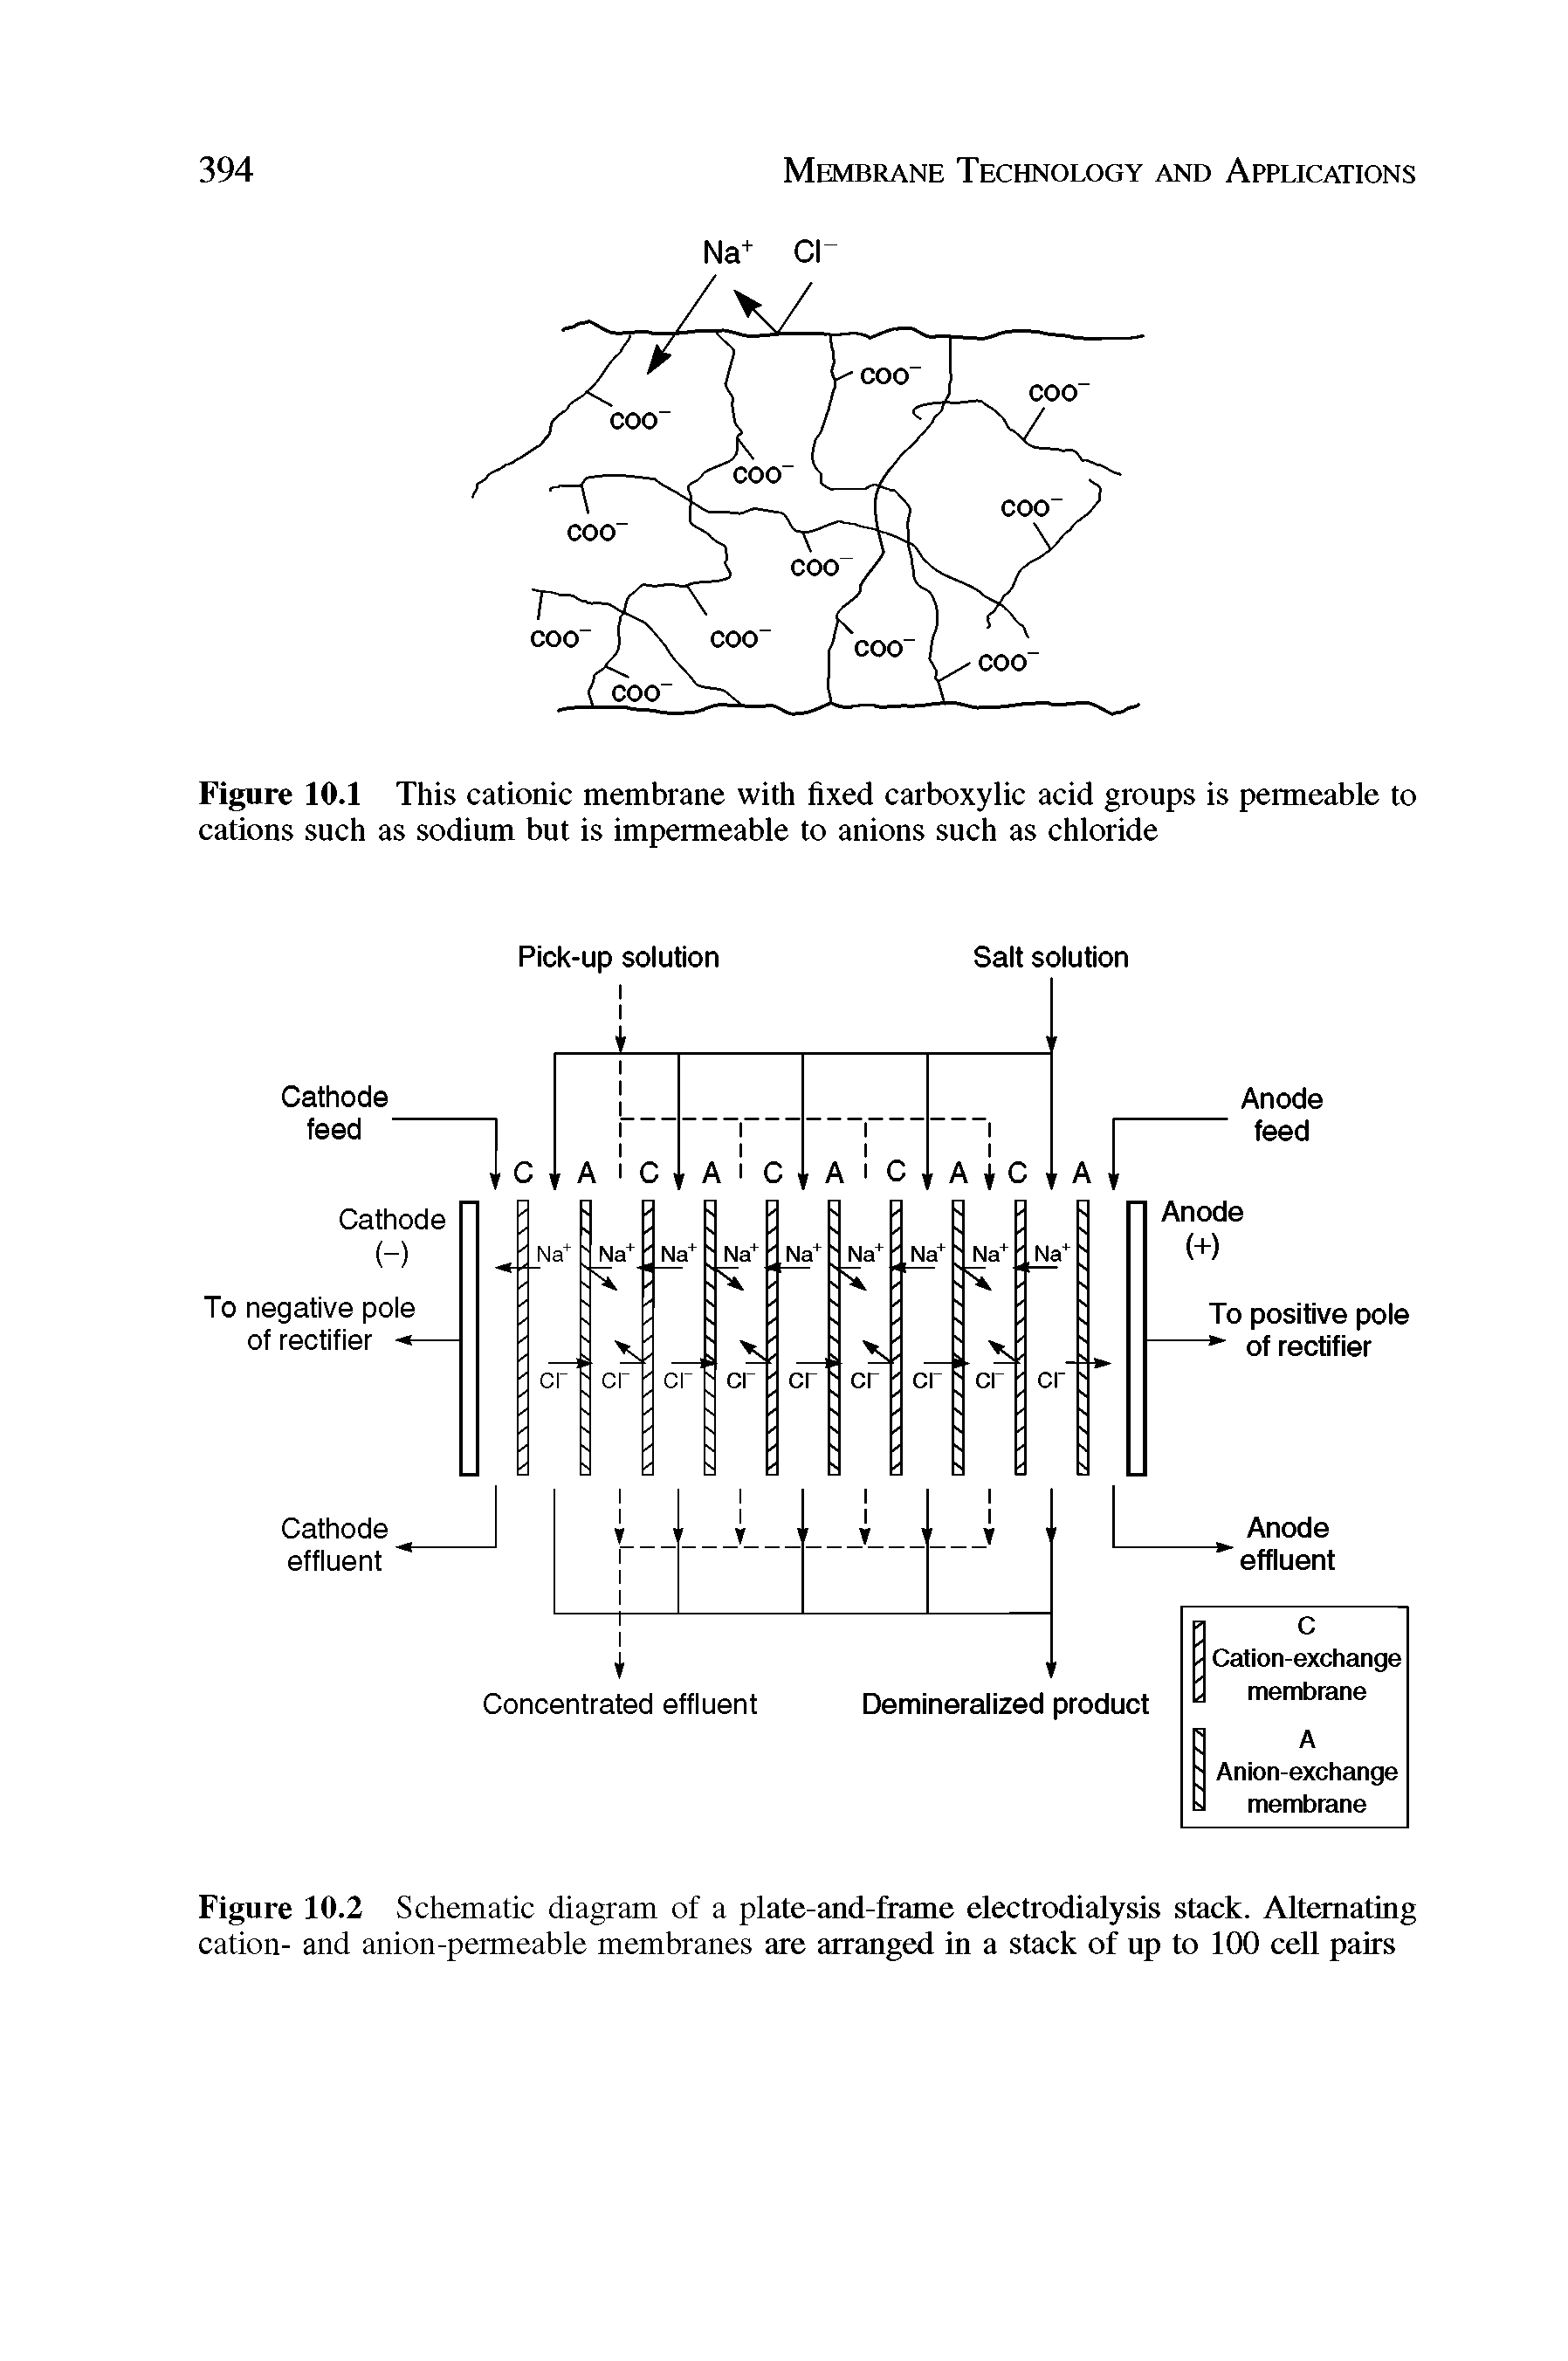 Figure 10.2 Schematic diagram of a plate-and-frame electrodialysis stack. Alternating cation- and anion-permeable membranes are arranged in a stack of up to 100 cell pairs...